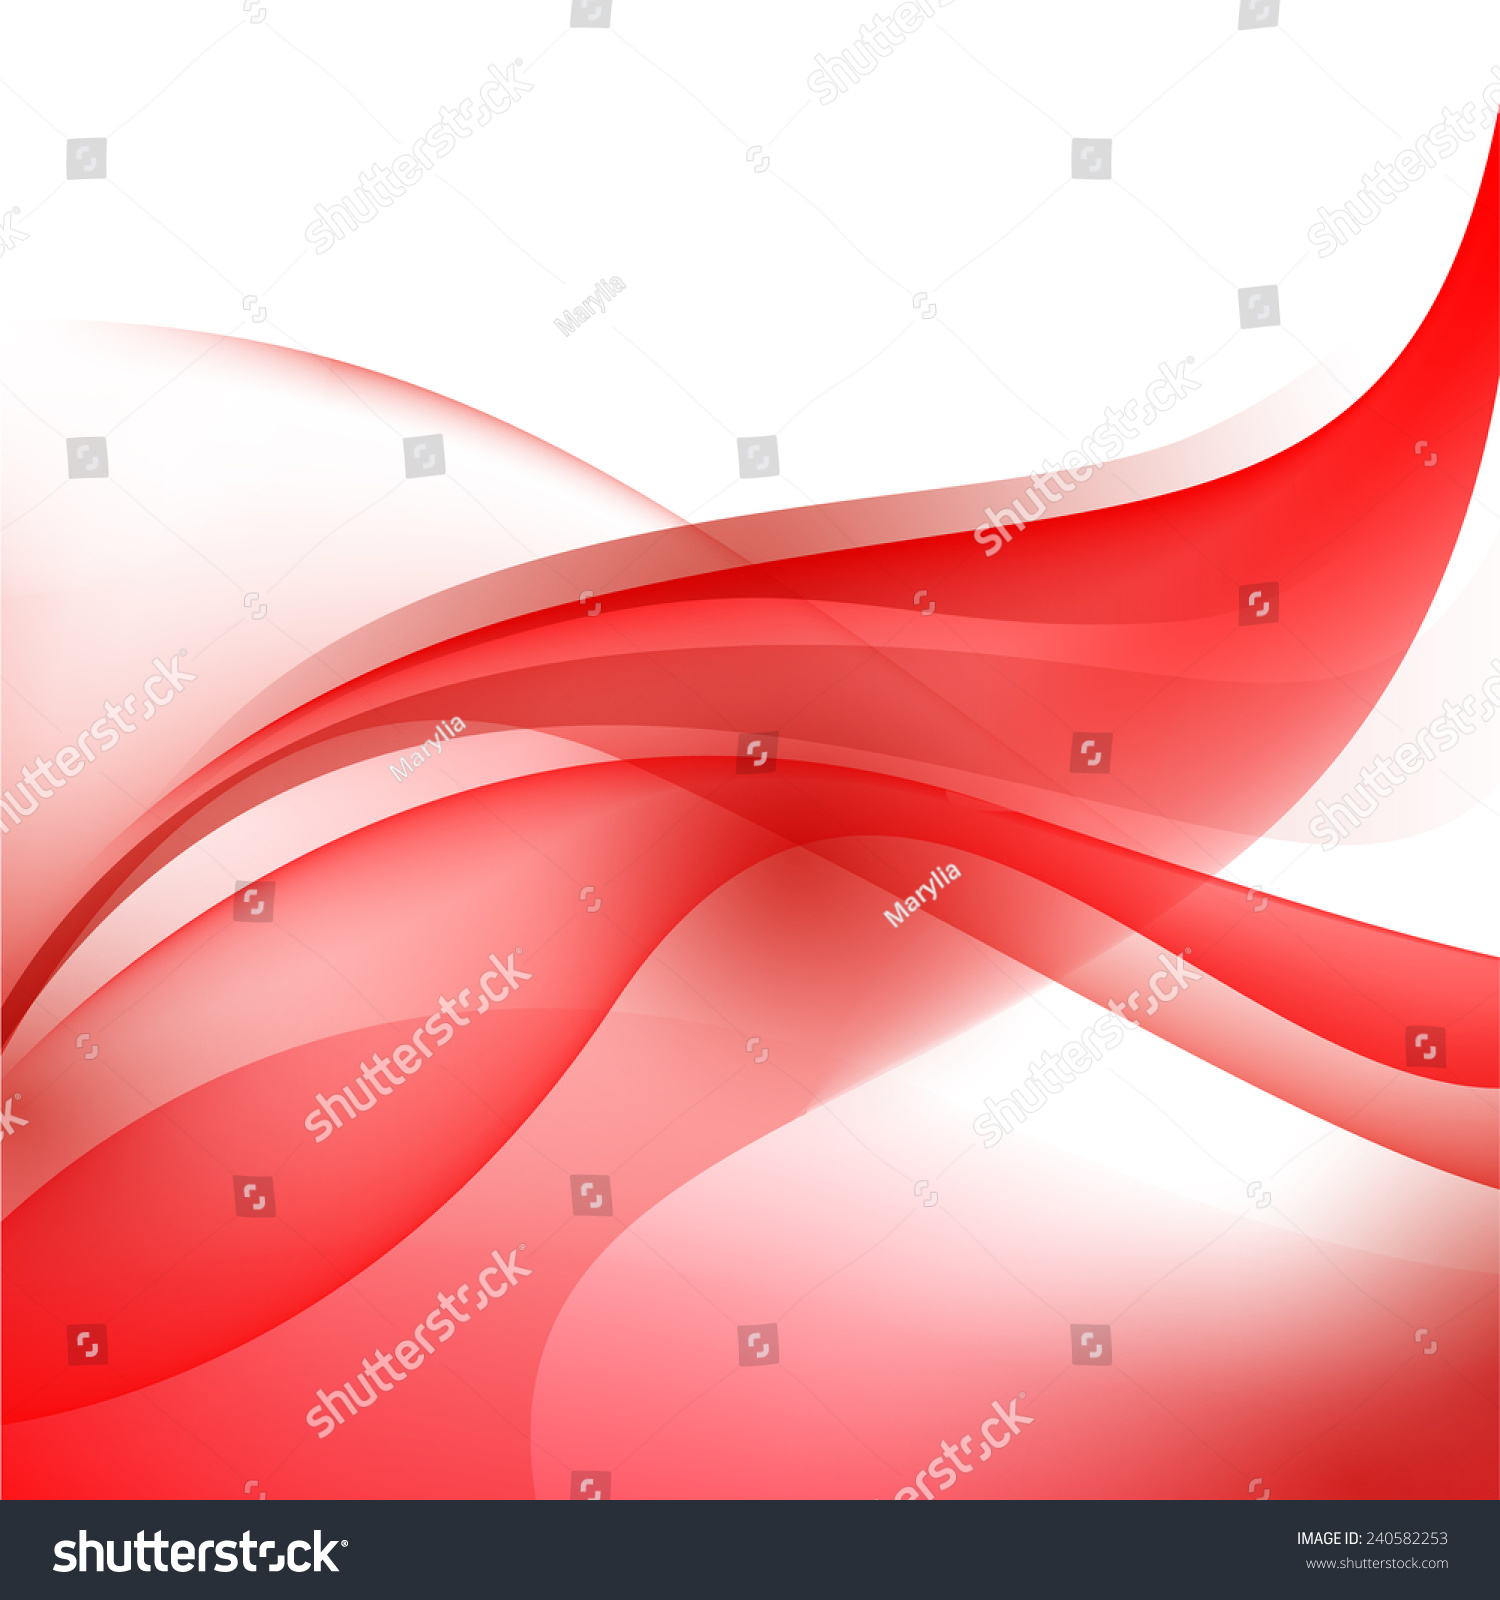 Vector Red Wavy Abstract Background - 240582253 : Shutterstock